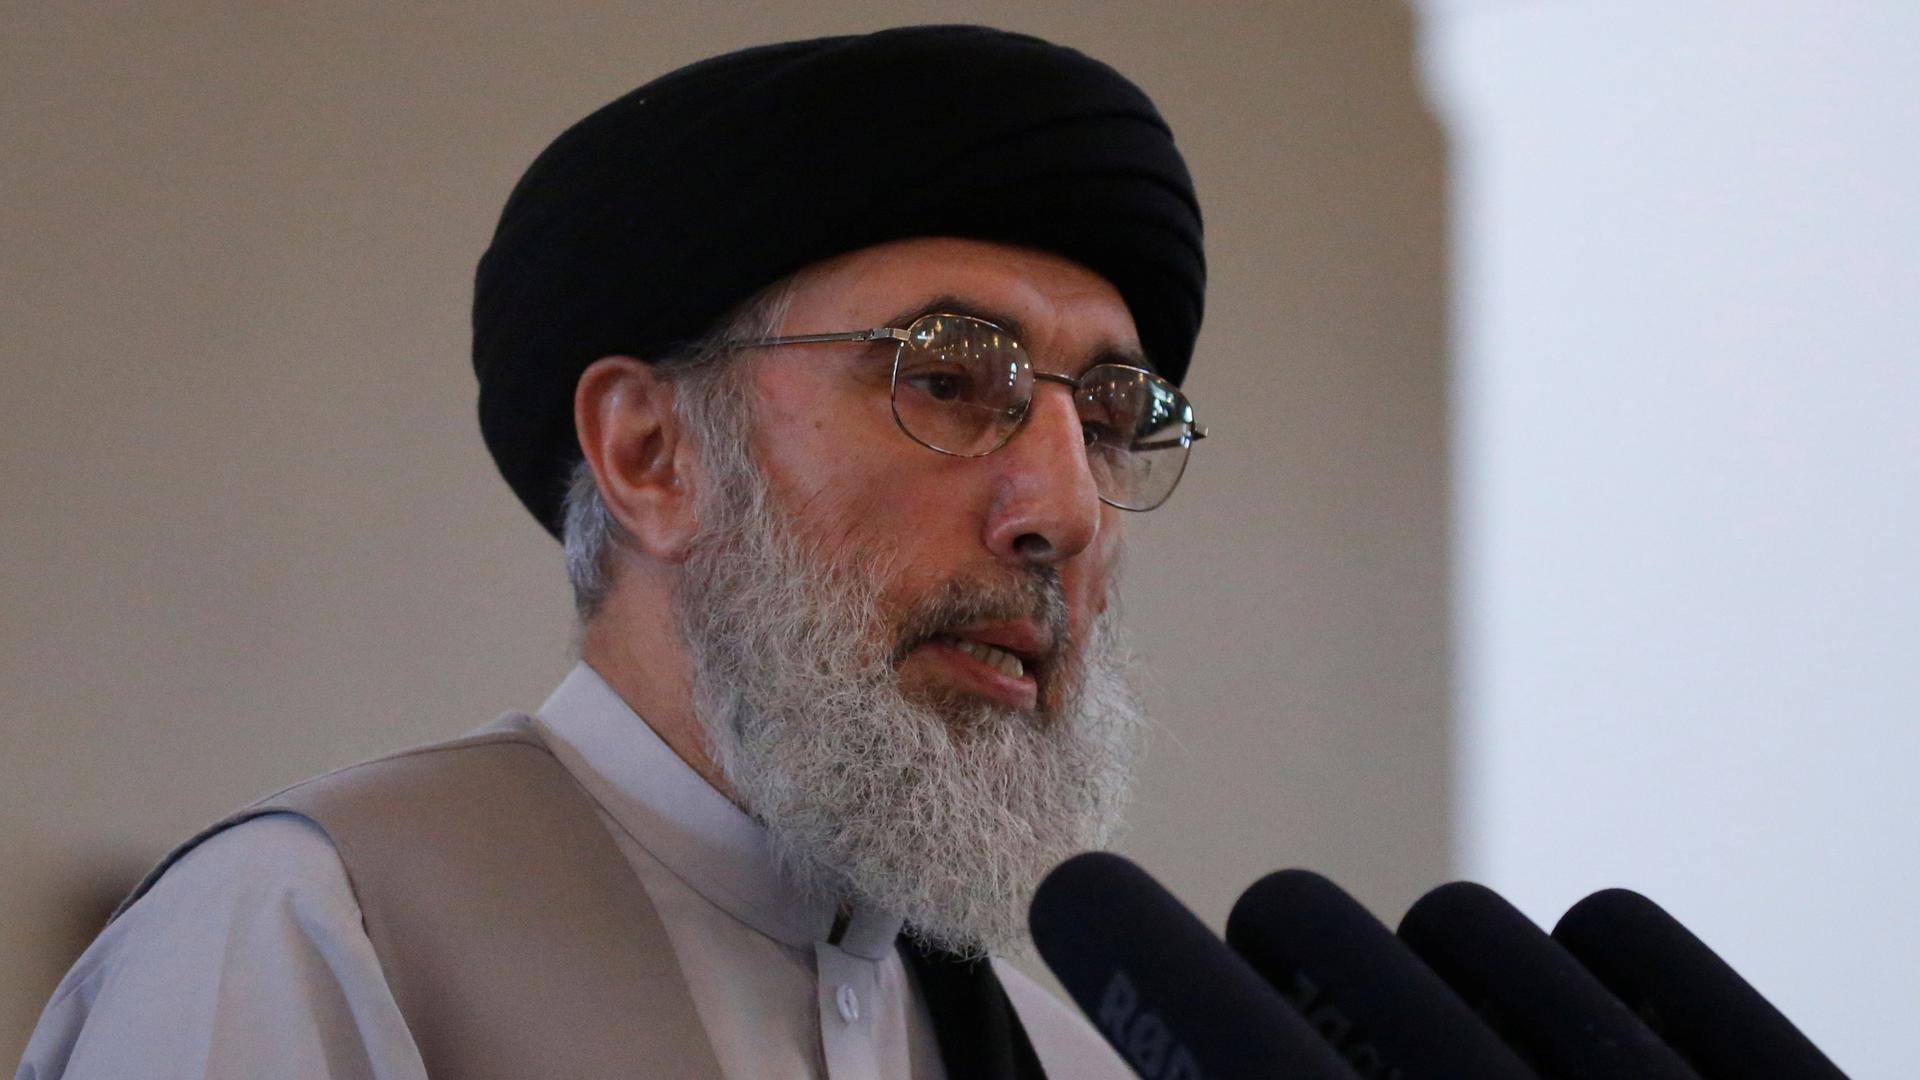 Afghan warlord Gulbuddin Hekmatyar speaks during a welcoming ceremony at the presidential palace in Kabul, Afghanistan May 4th, 2017   